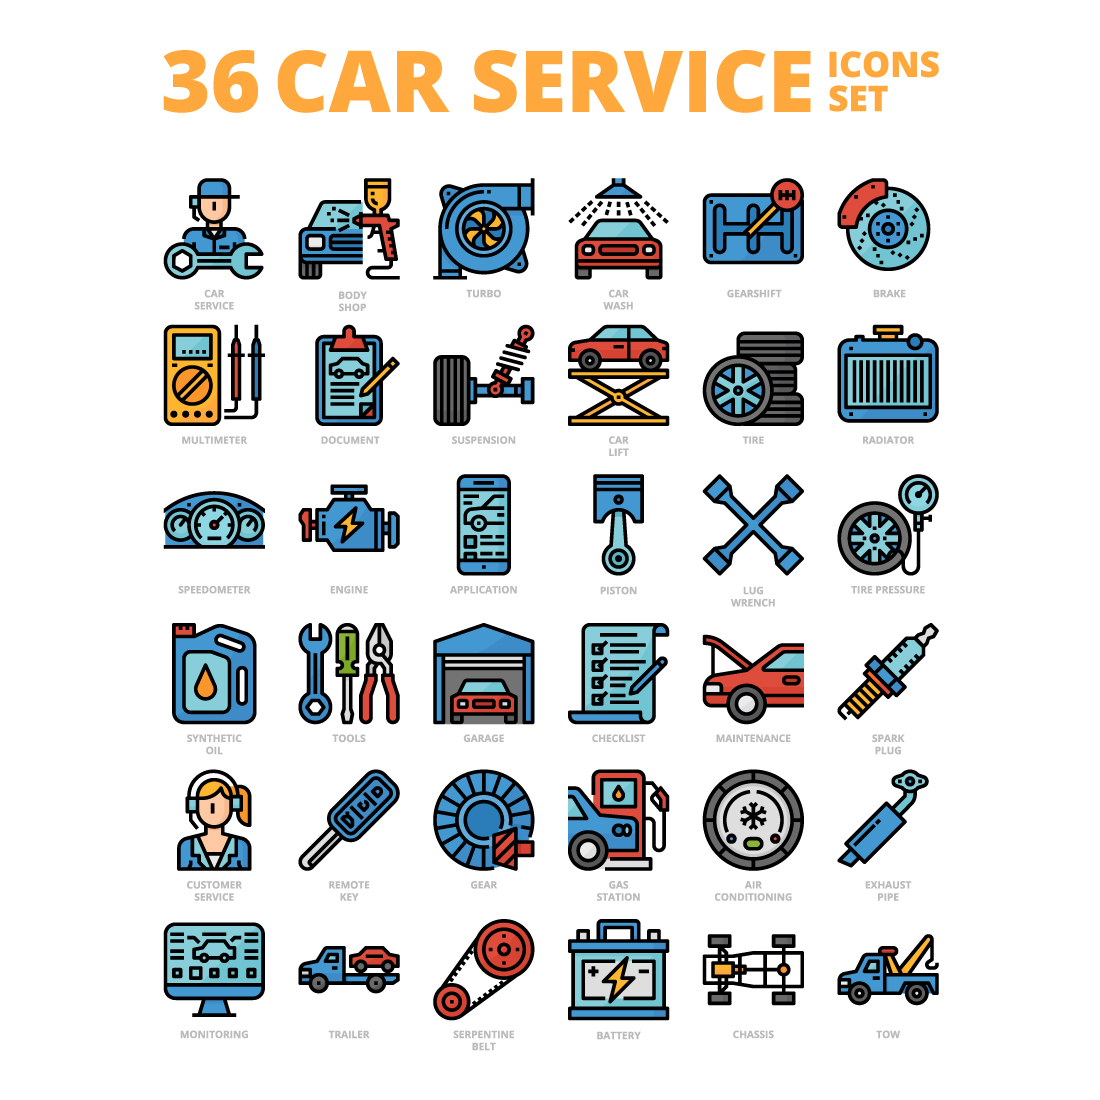 36 Car Service Icons Set x 4 Styles cover image.